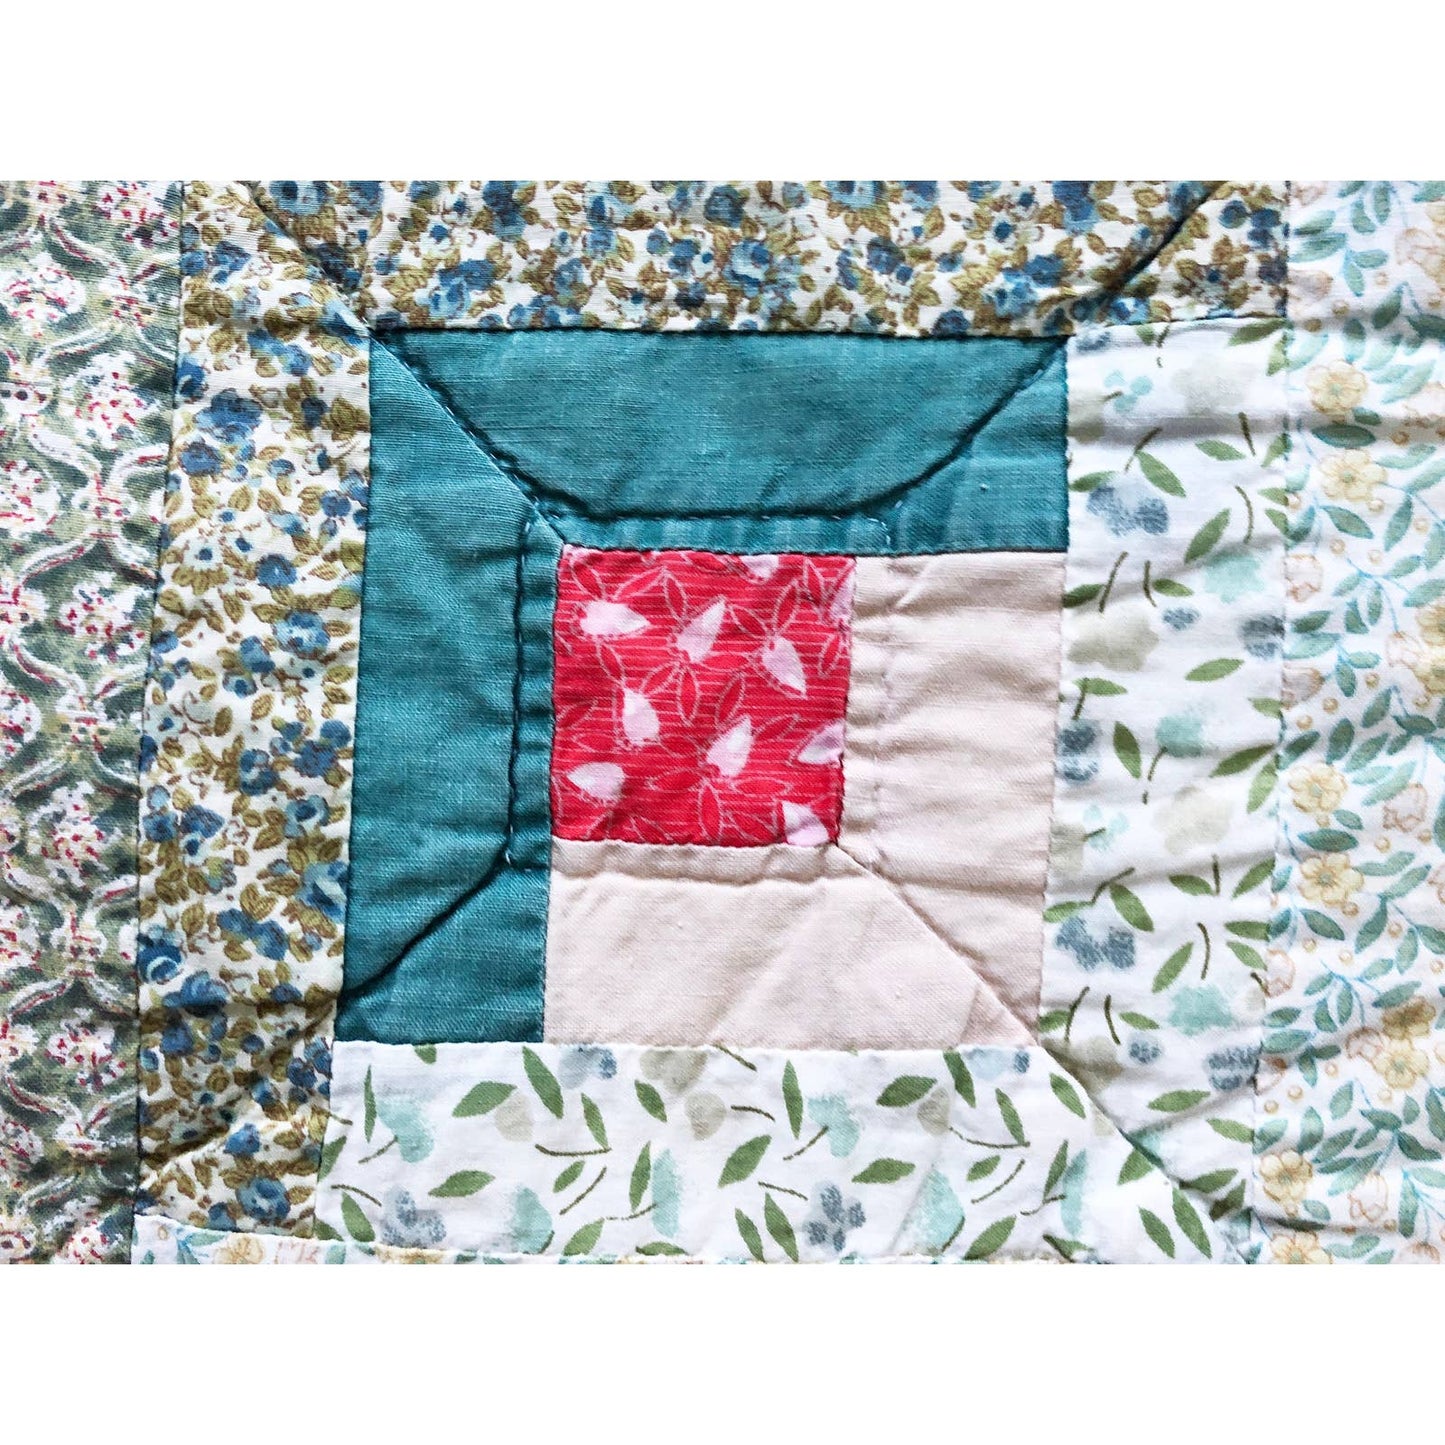 Vintage Floral Queen Quilt w/ Red and Green Details